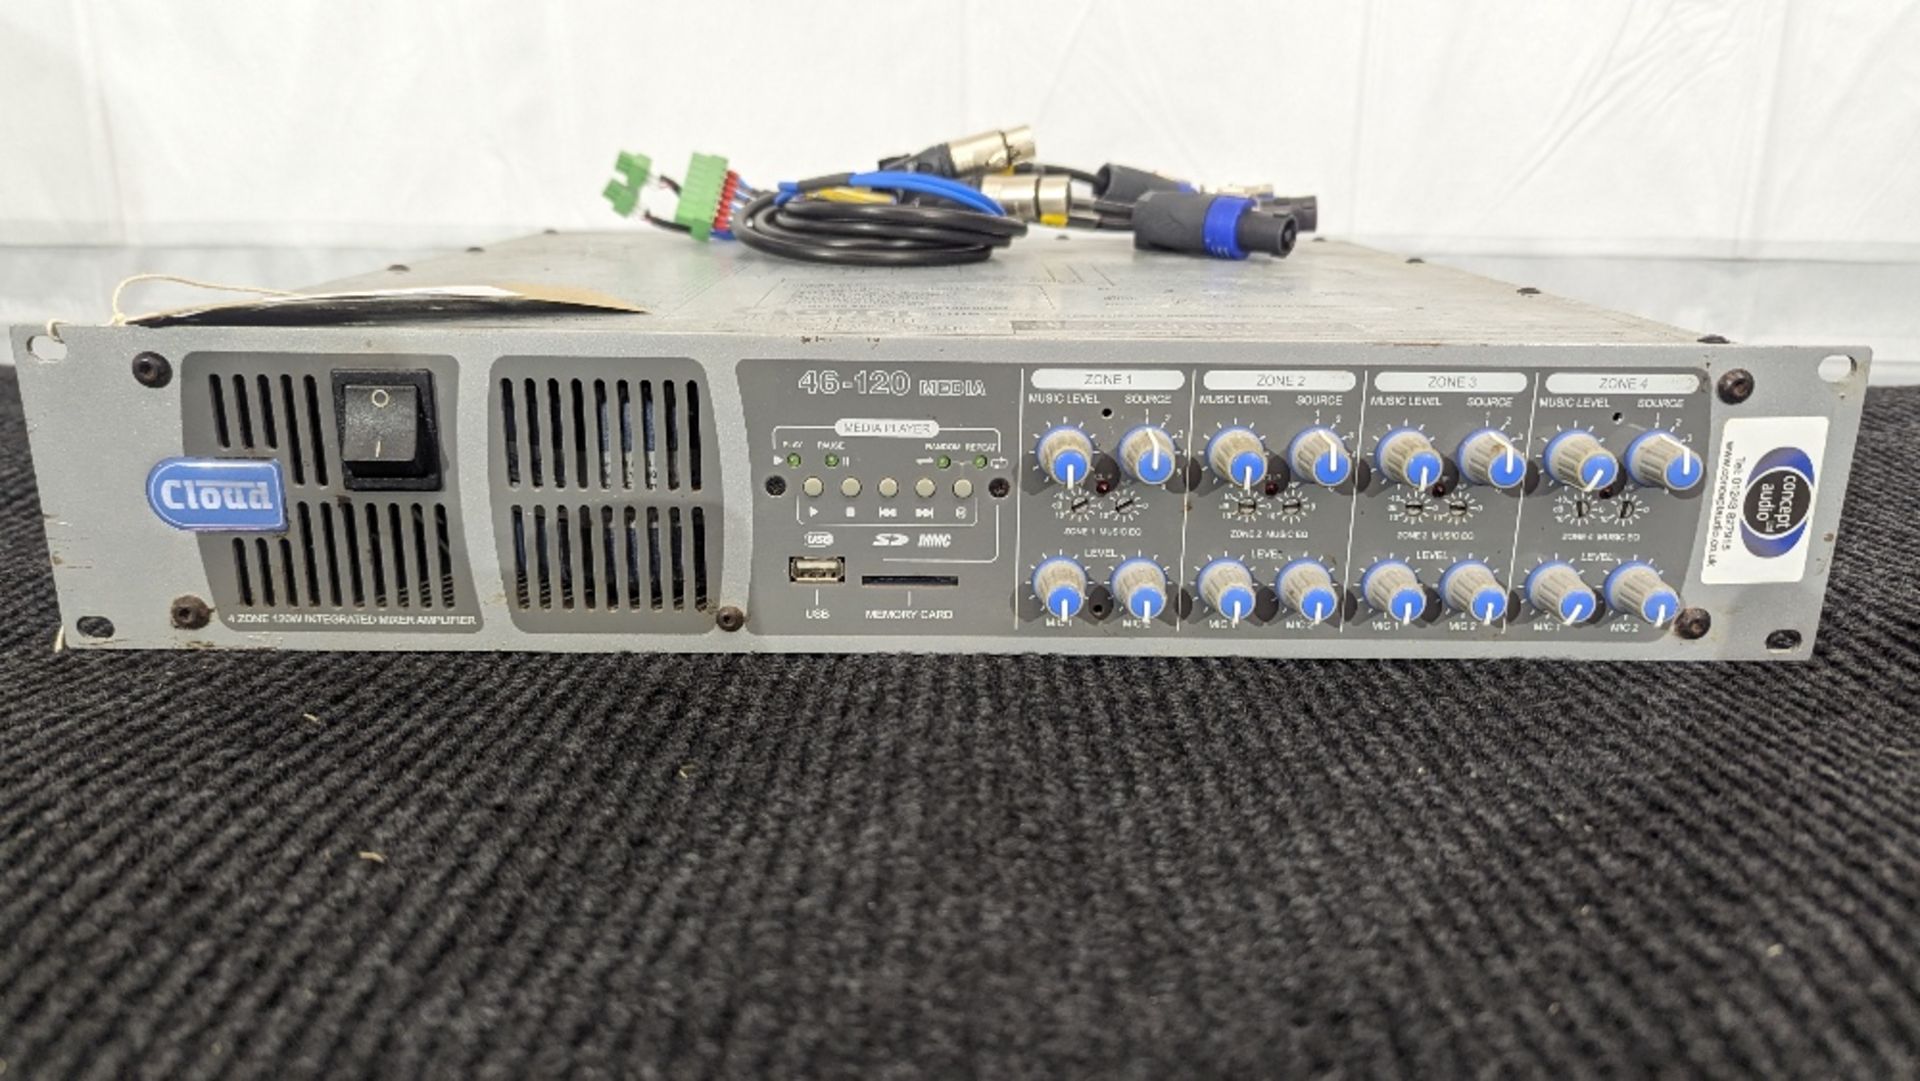 Cloud 46-120 Media 4-Zone 120W Integrated Mixer Amplifier - Image 2 of 4